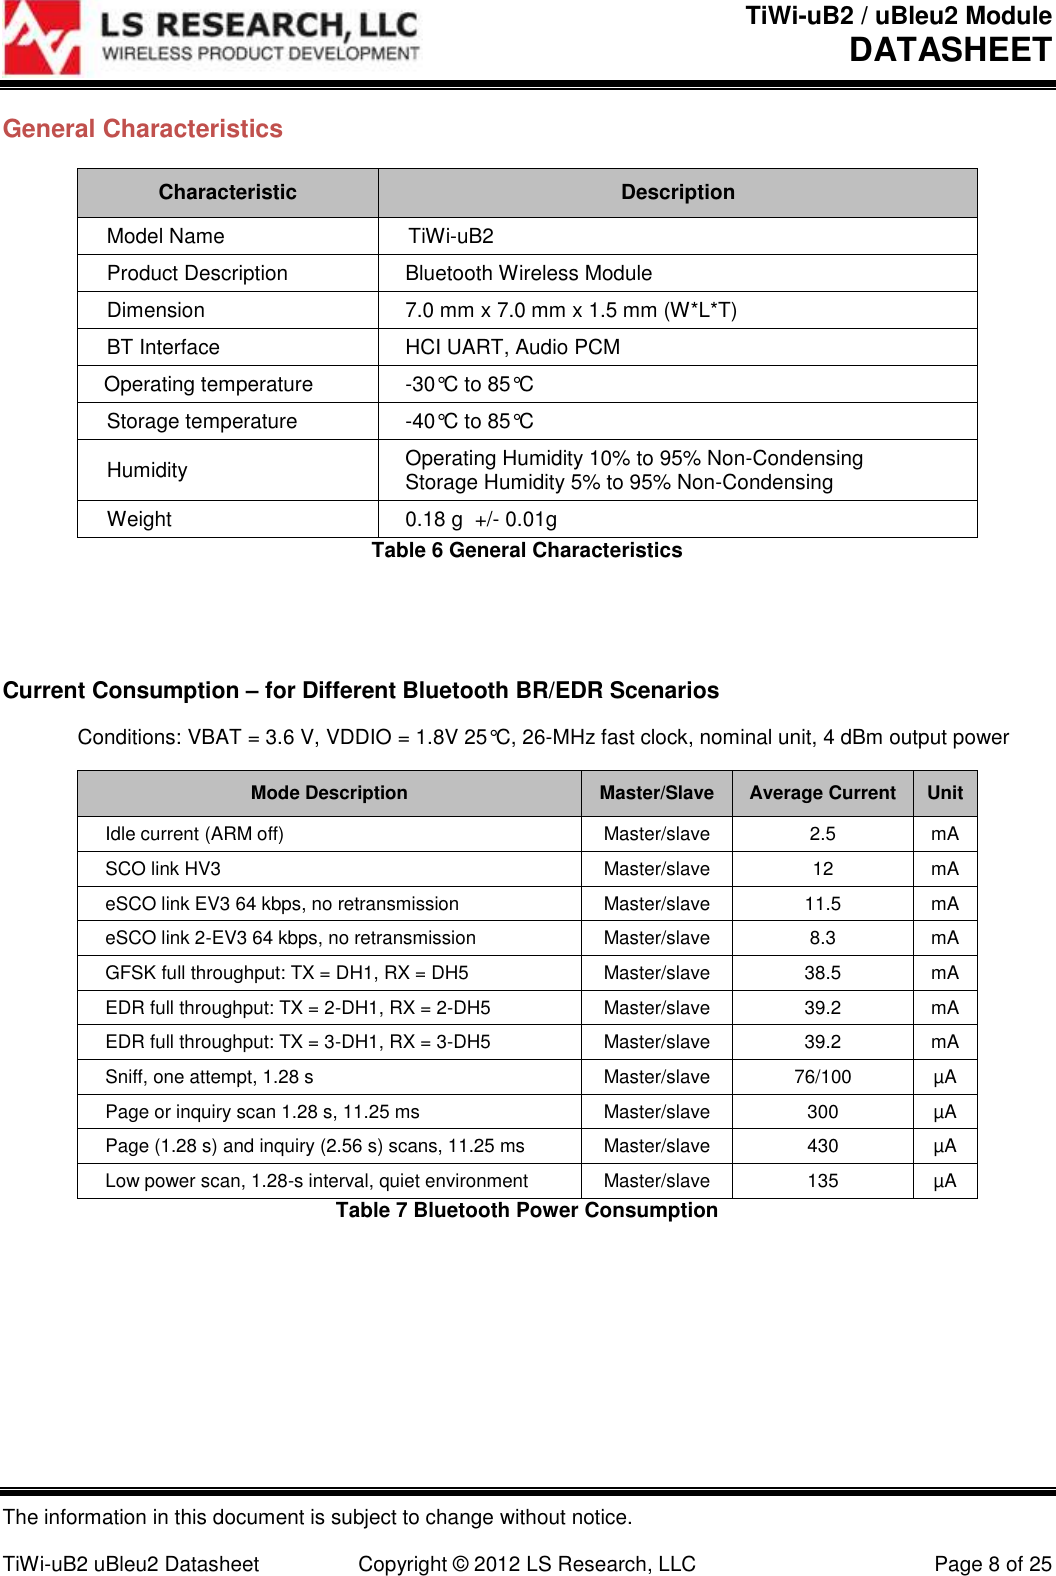 TiWi-uB2 / uBleu2 Module DATASHEET  The information in this document is subject to change without notice.  TiWi-uB2 uBleu2 Datasheet  Copyright © 2012 LS Research, LLC  Page 8 of 25 General Characteristics Characteristic Description Model Name TiWi-uB2 Product Description Bluetooth Wireless Module Dimension 7.0 mm x 7.0 mm x 1.5 mm (W*L*T)  BT Interface HCI UART, Audio PCM Operating temperature -30°C to 85°C Storage temperature -40°C to 85°C Humidity Operating Humidity 10% to 95% Non-Condensing Storage Humidity 5% to 95% Non-Condensing Weight 0.18 g  +/- 0.01g Table 6 General Characteristics   Current Consumption – for Different Bluetooth BR/EDR Scenarios   Conditions: VBAT = 3.6 V, VDDIO = 1.8V 25°C, 26-MHz fast clock, nominal unit, 4 dBm output power Mode Description Master/Slave Average Current Unit Idle current (ARM off) Master/slave 2.5 mA SCO link HV3 Master/slave 12 mA eSCO link EV3 64 kbps, no retransmission Master/slave 11.5 mA eSCO link 2-EV3 64 kbps, no retransmission Master/slave 8.3 mA GFSK full throughput: TX = DH1, RX = DH5 Master/slave 38.5 mA EDR full throughput: TX = 2-DH1, RX = 2-DH5 Master/slave 39.2 mA EDR full throughput: TX = 3-DH1, RX = 3-DH5 Master/slave 39.2 mA Sniff, one attempt, 1.28 s Master/slave 76/100 µA Page or inquiry scan 1.28 s, 11.25 ms Master/slave 300 µA Page (1.28 s) and inquiry (2.56 s) scans, 11.25 ms Master/slave 430 µA Low power scan, 1.28-s interval, quiet environment Master/slave 135 µA Table 7 Bluetooth Power Consumption   